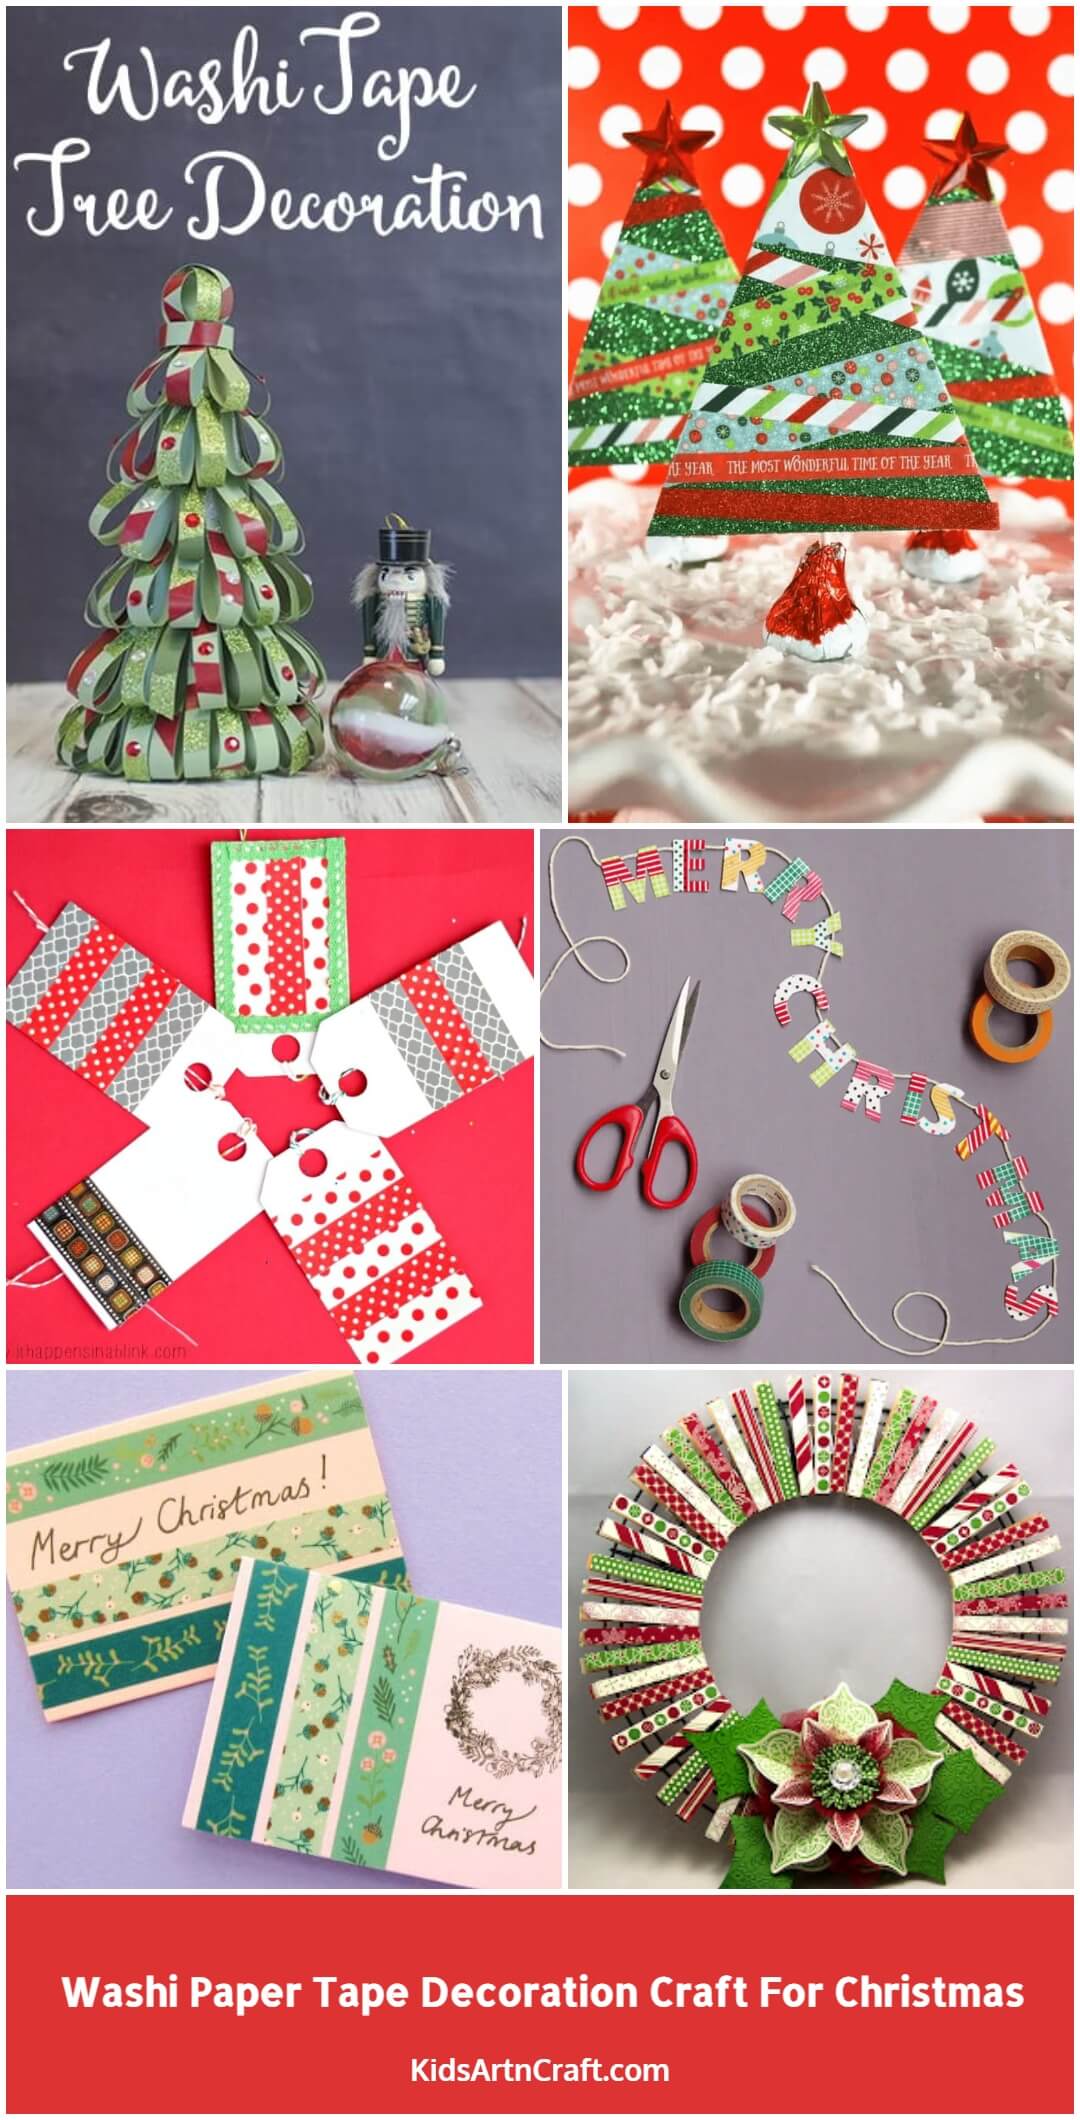 Washi Paper Tape Decoration Craft For Christmas